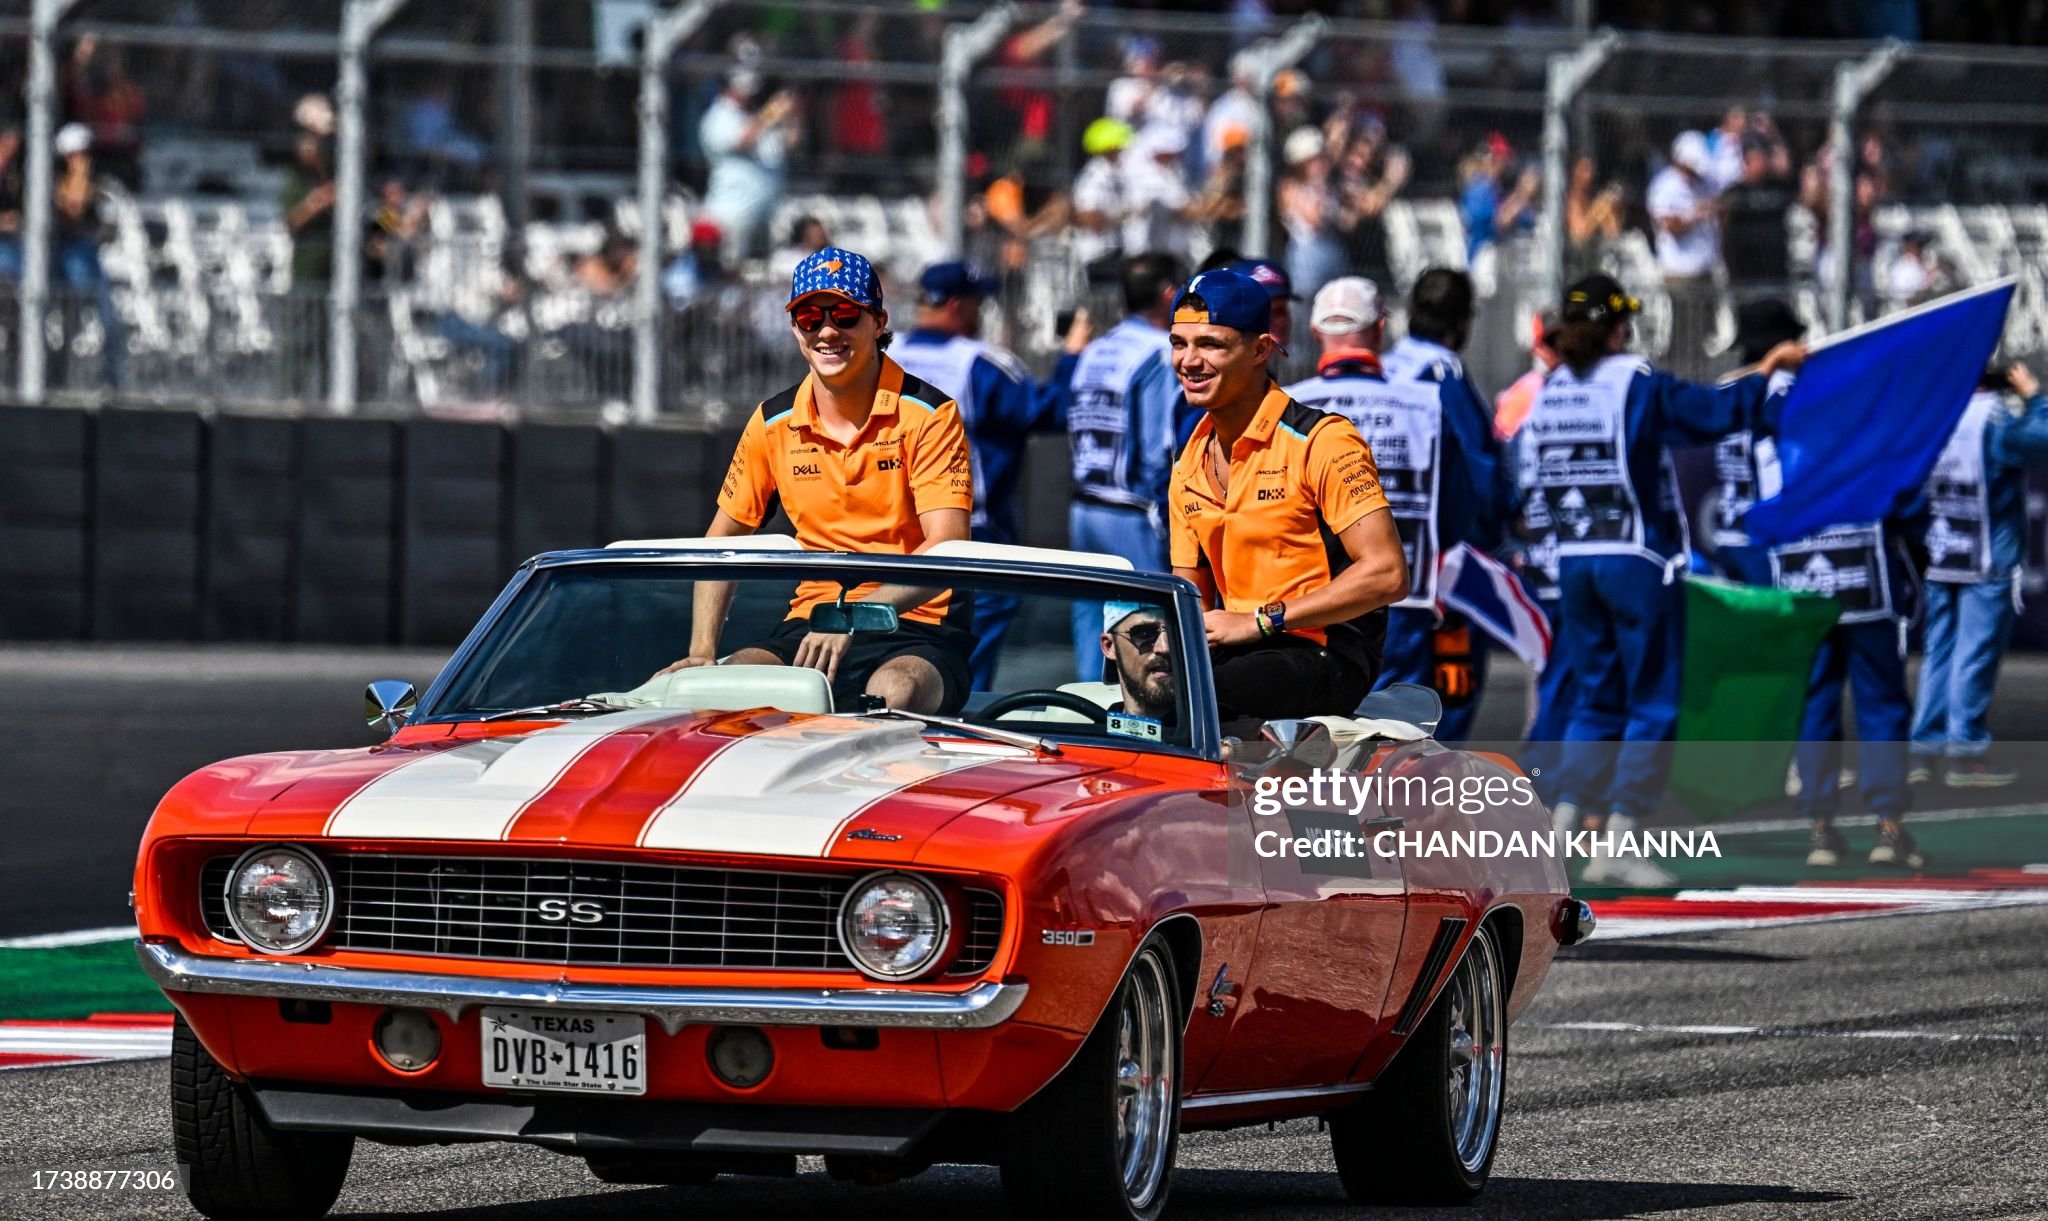 Two individuals in racing team attire riding in a vintage convertible car at a racetrack event organized by an Austin Realtor.